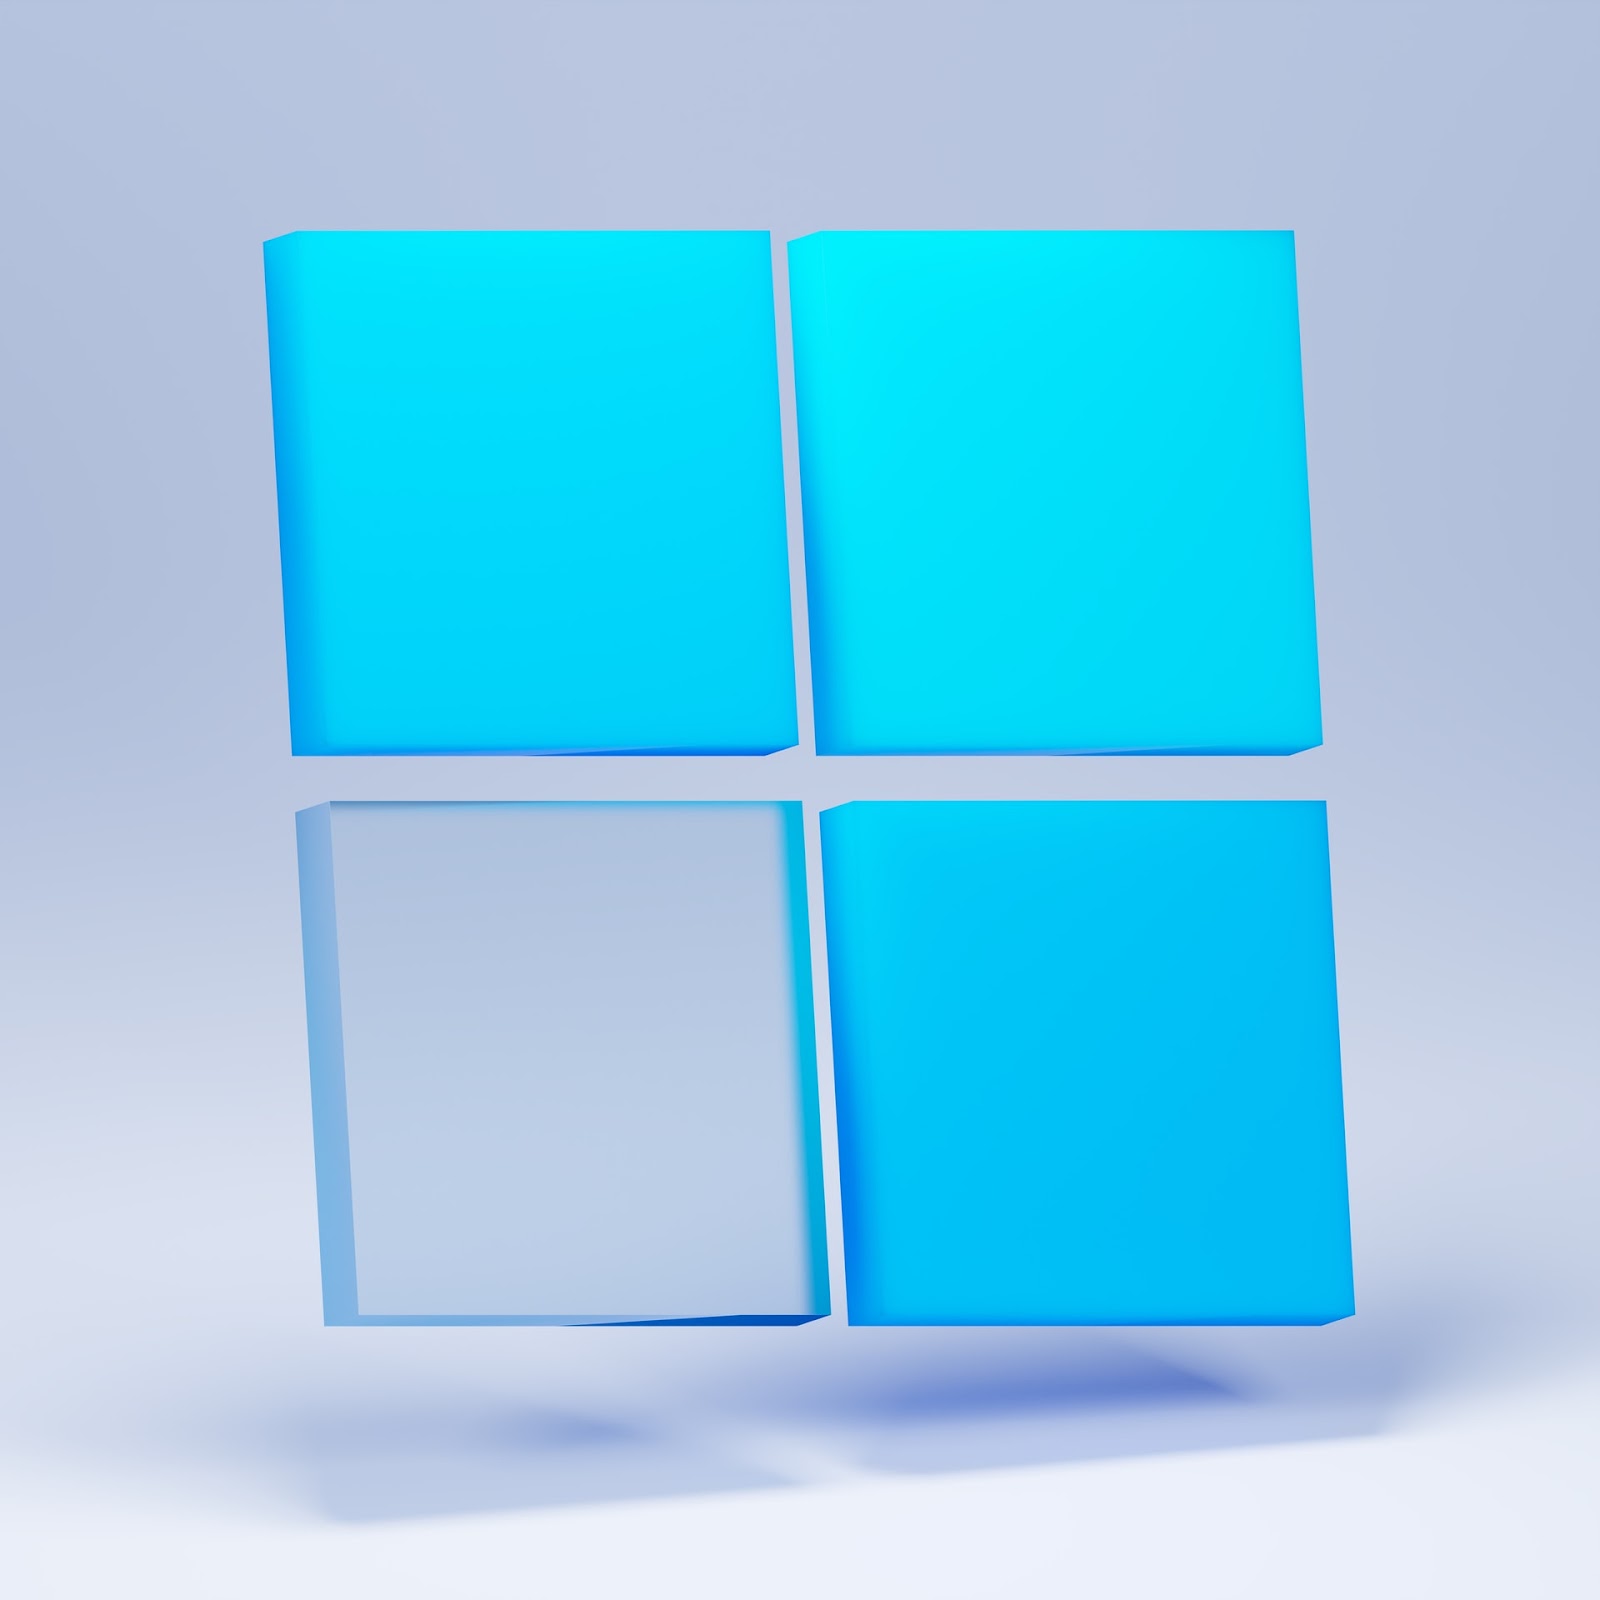 Blue Microsoft icon with white background